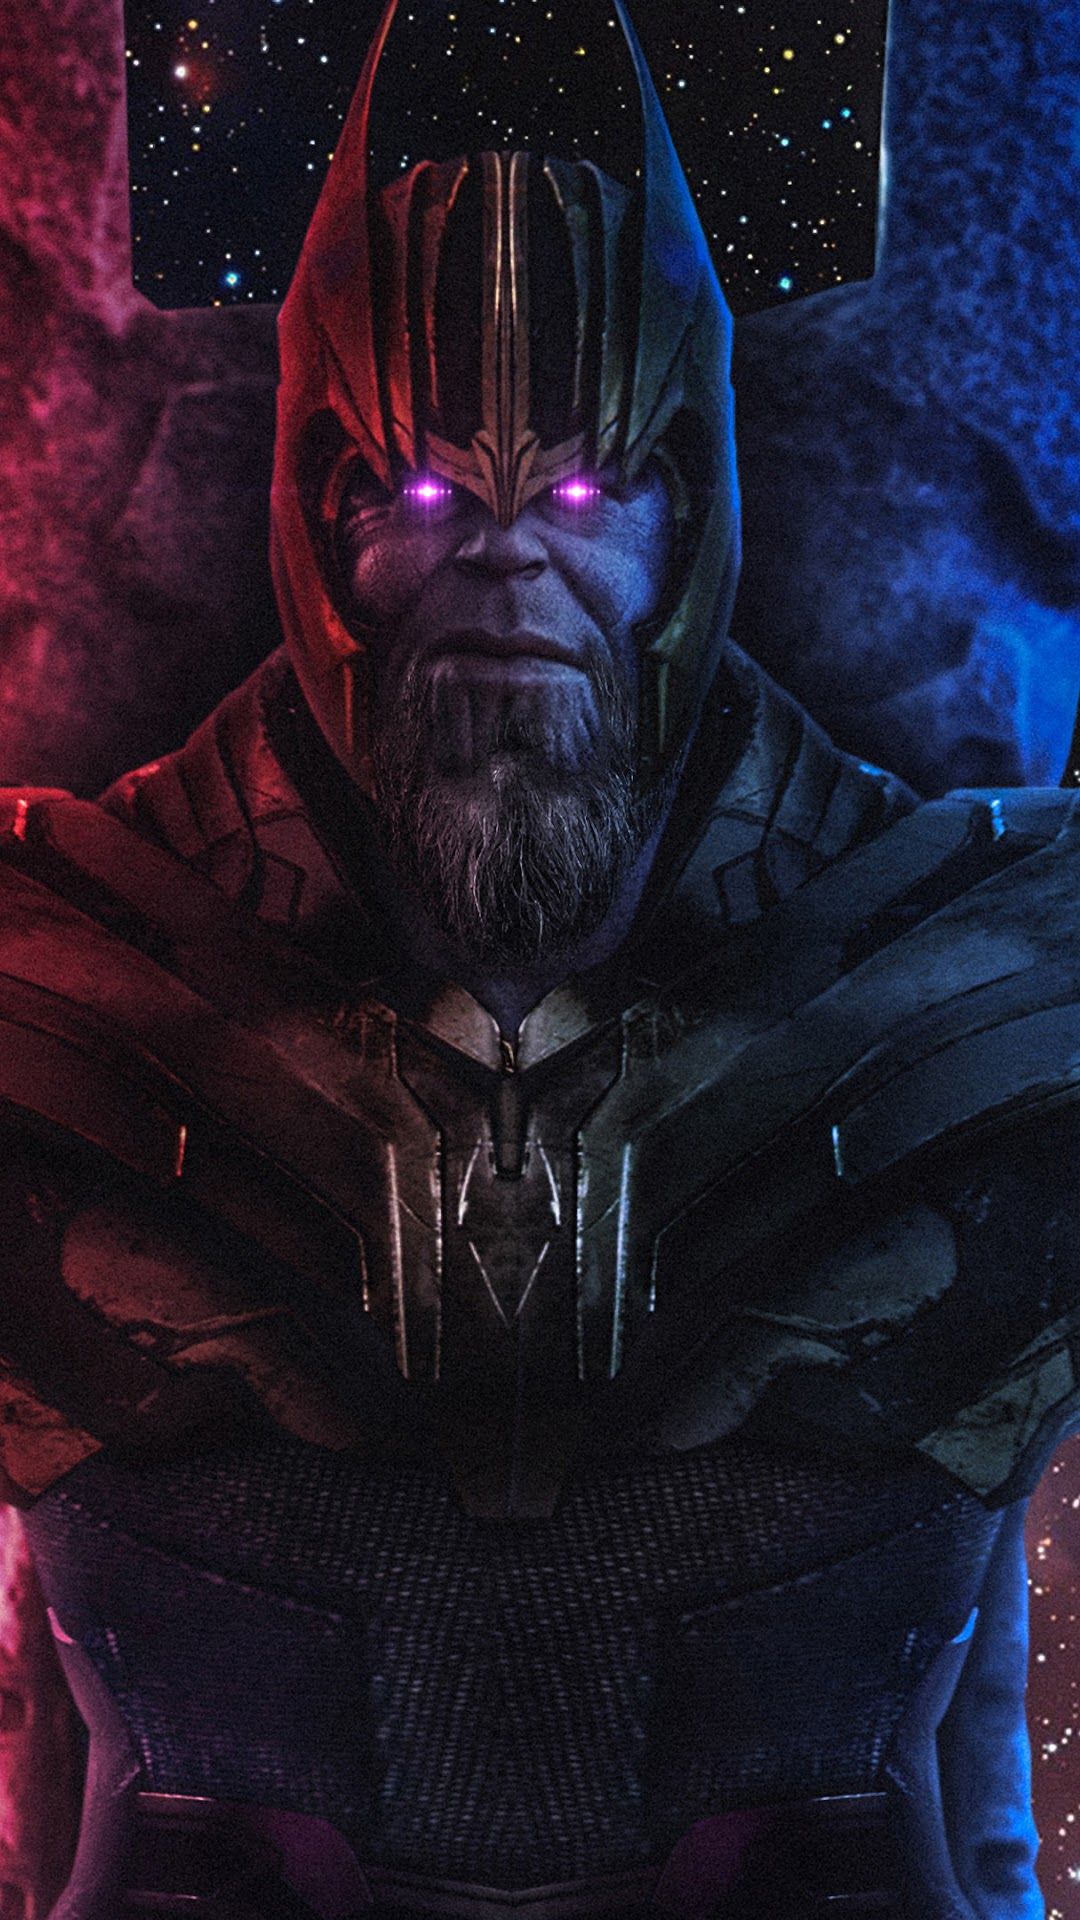 Thanos, Infinity Gauntlet phone HD Wallpaper, Image, Background, Photo and Picture. Mocah HD Wallpaper